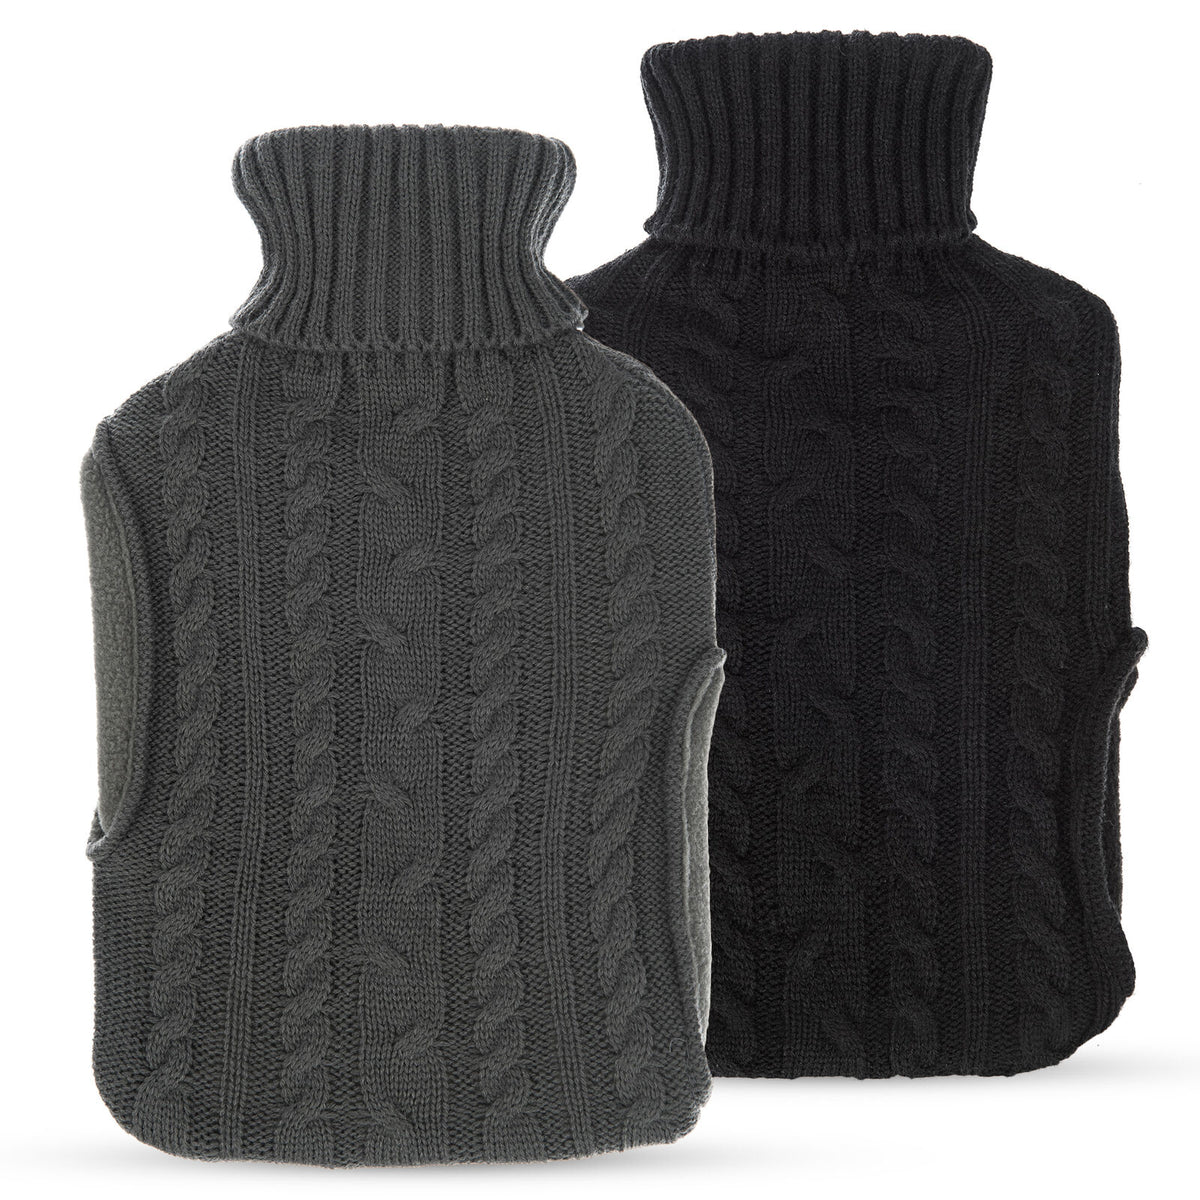 Hot Water Bottle With Knitted Soft Cozy Bag Cover